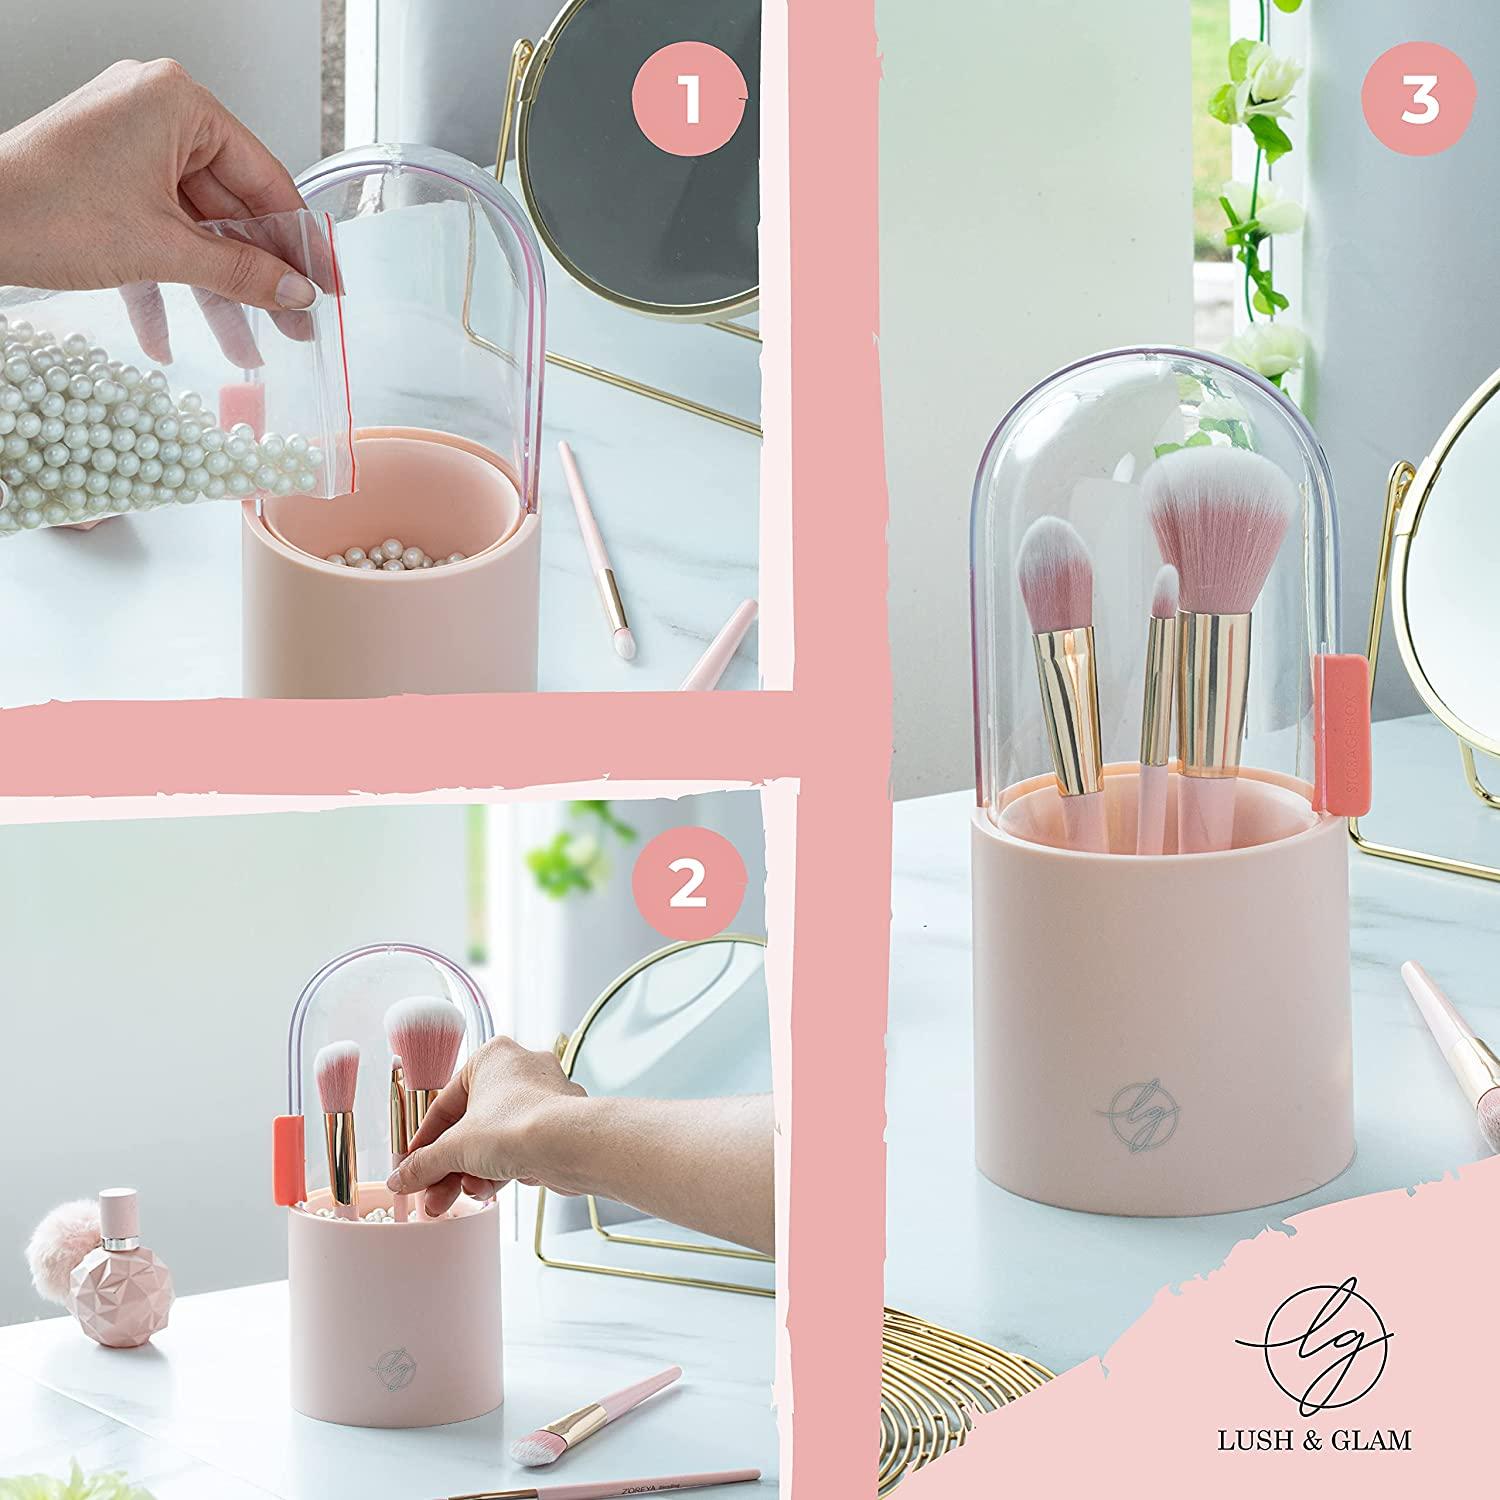 Lush and Glam Makeup Brush Holders, Bell Jar Covered Makeup Brush